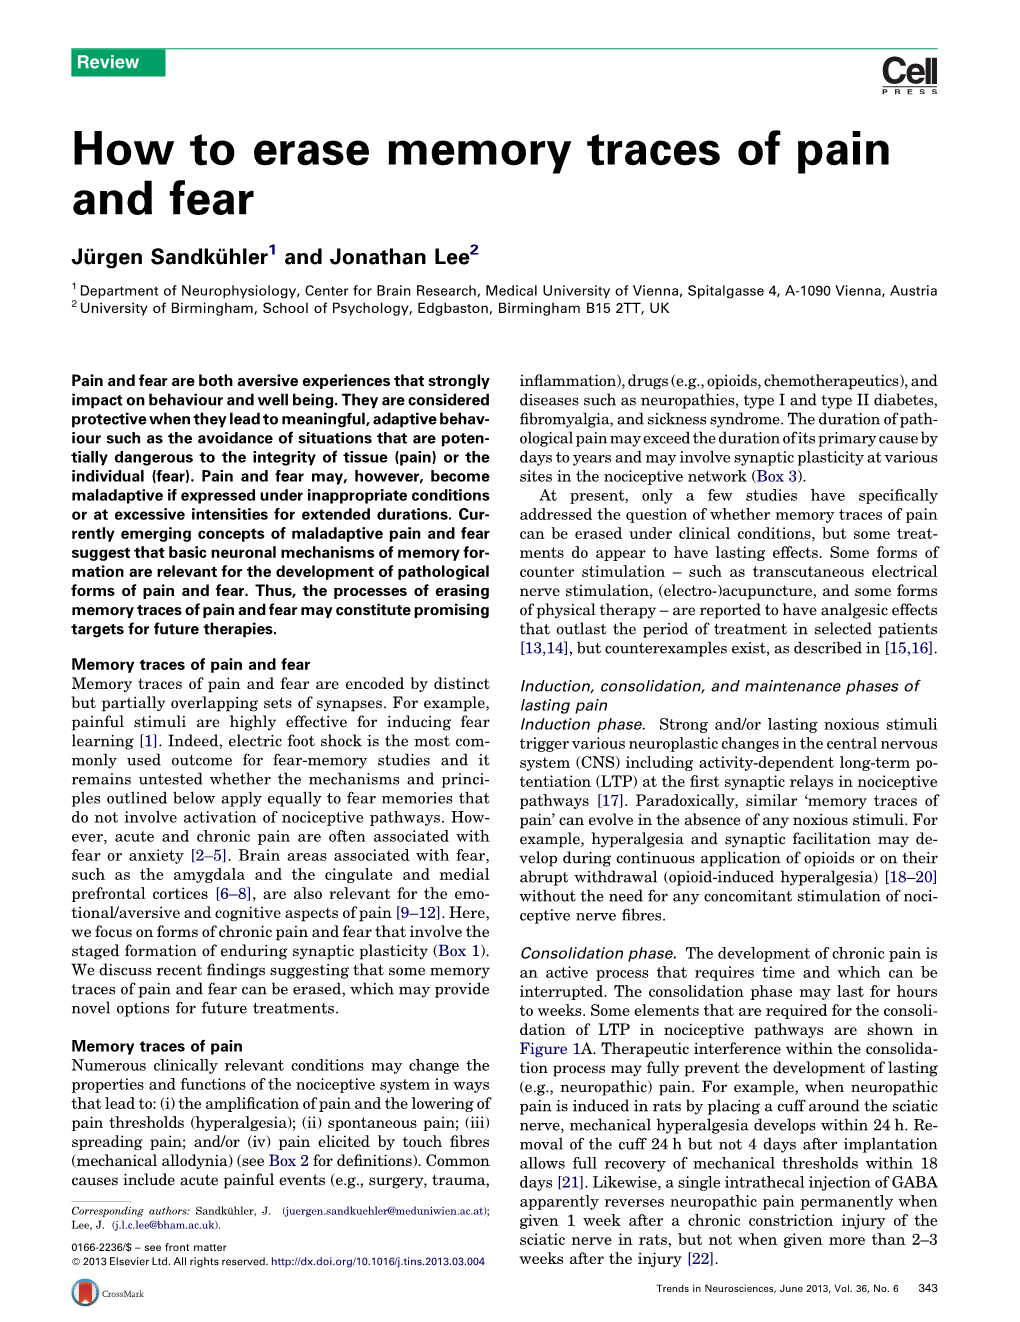 How to Erase Memory Traces of Pain and Fear